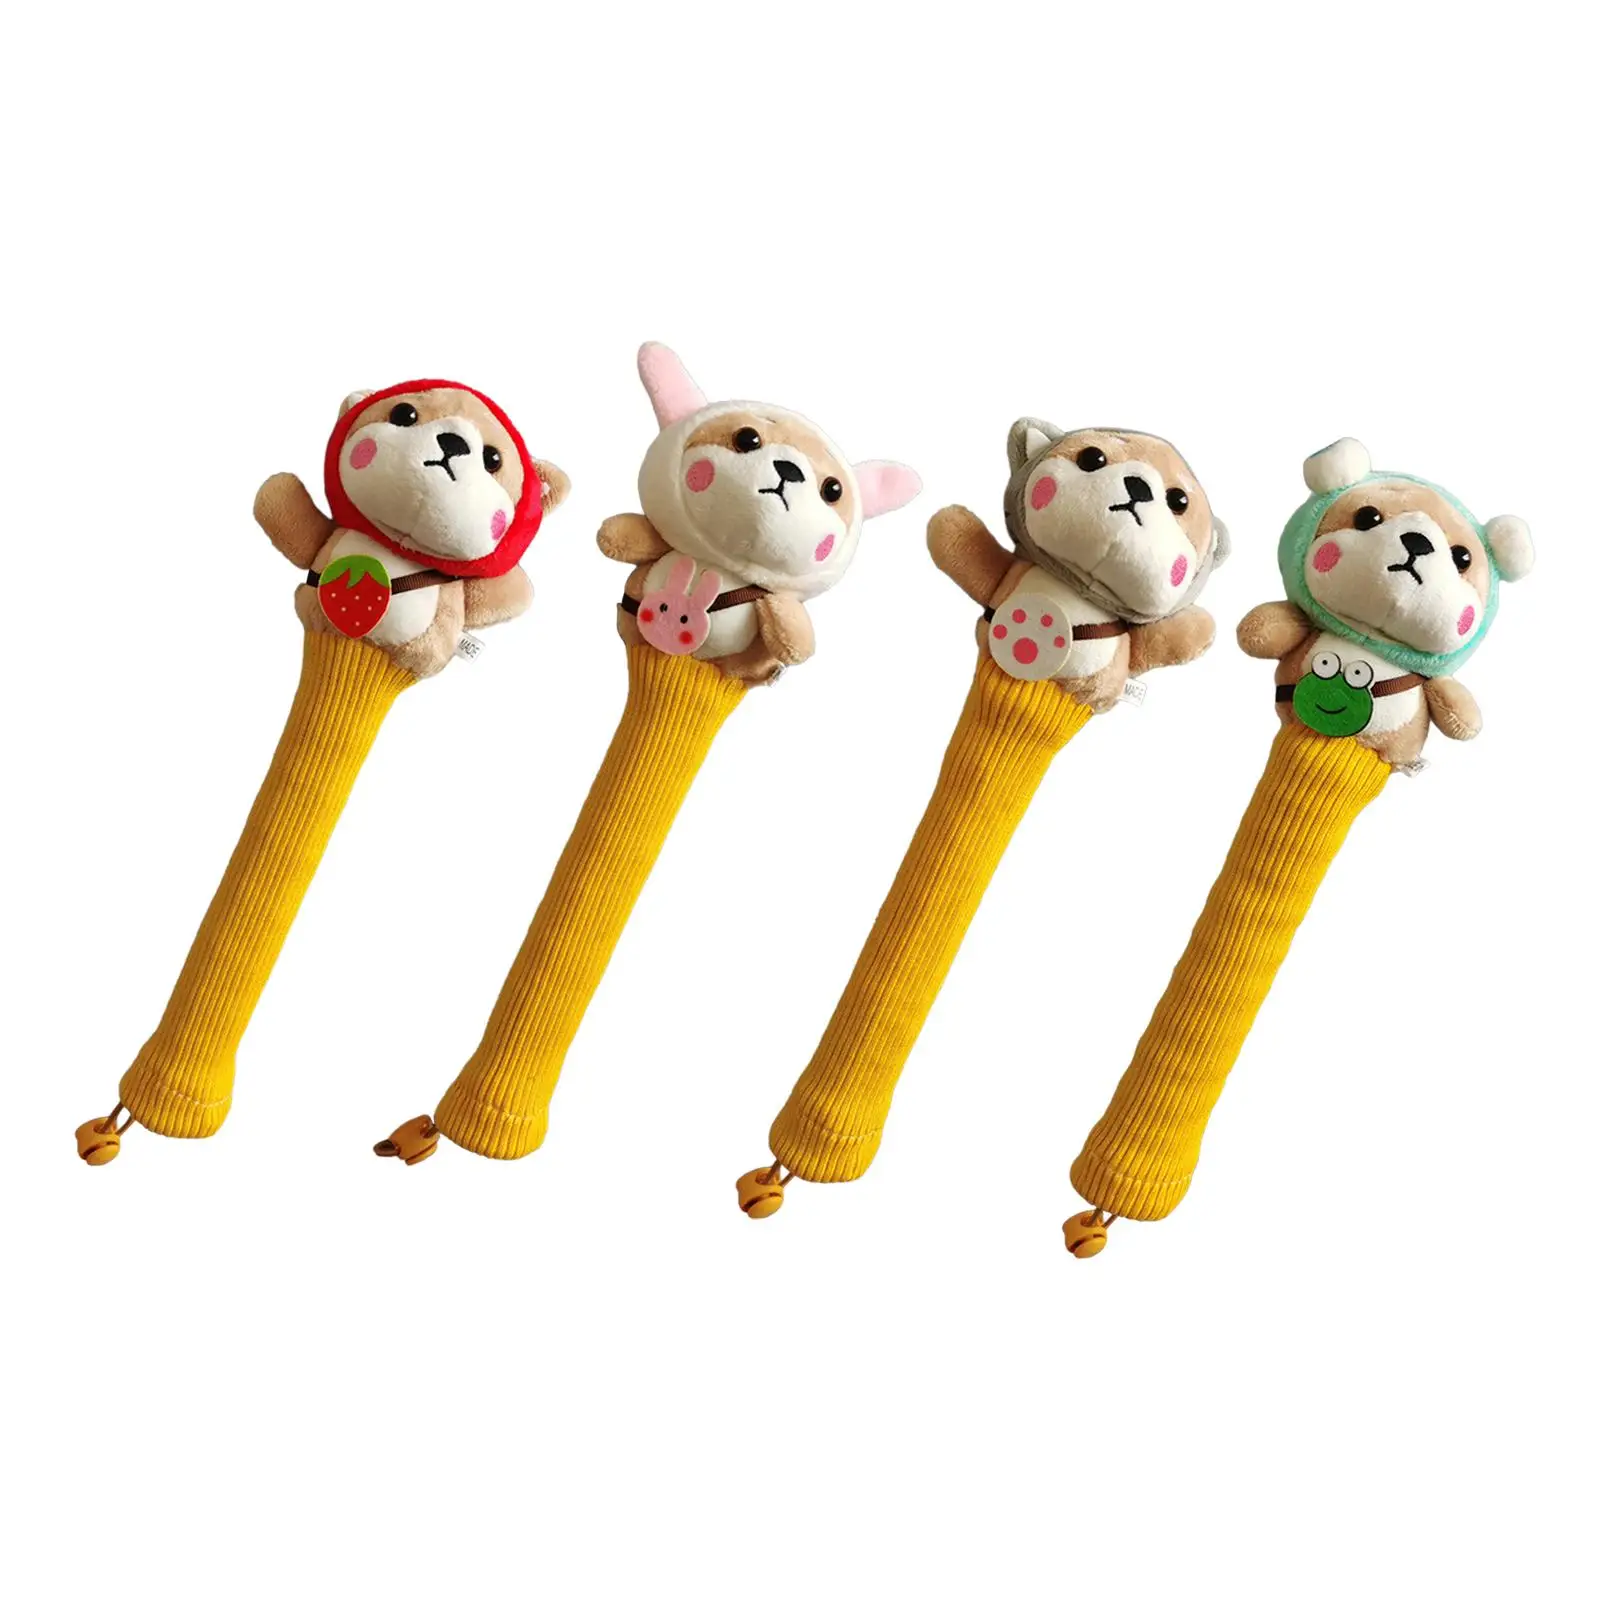 

Badminton Racket Handle Cover Sweat Absorption for Active Players Decorative Shock Absorbing Cute Stuffed Animal Tennis Grip